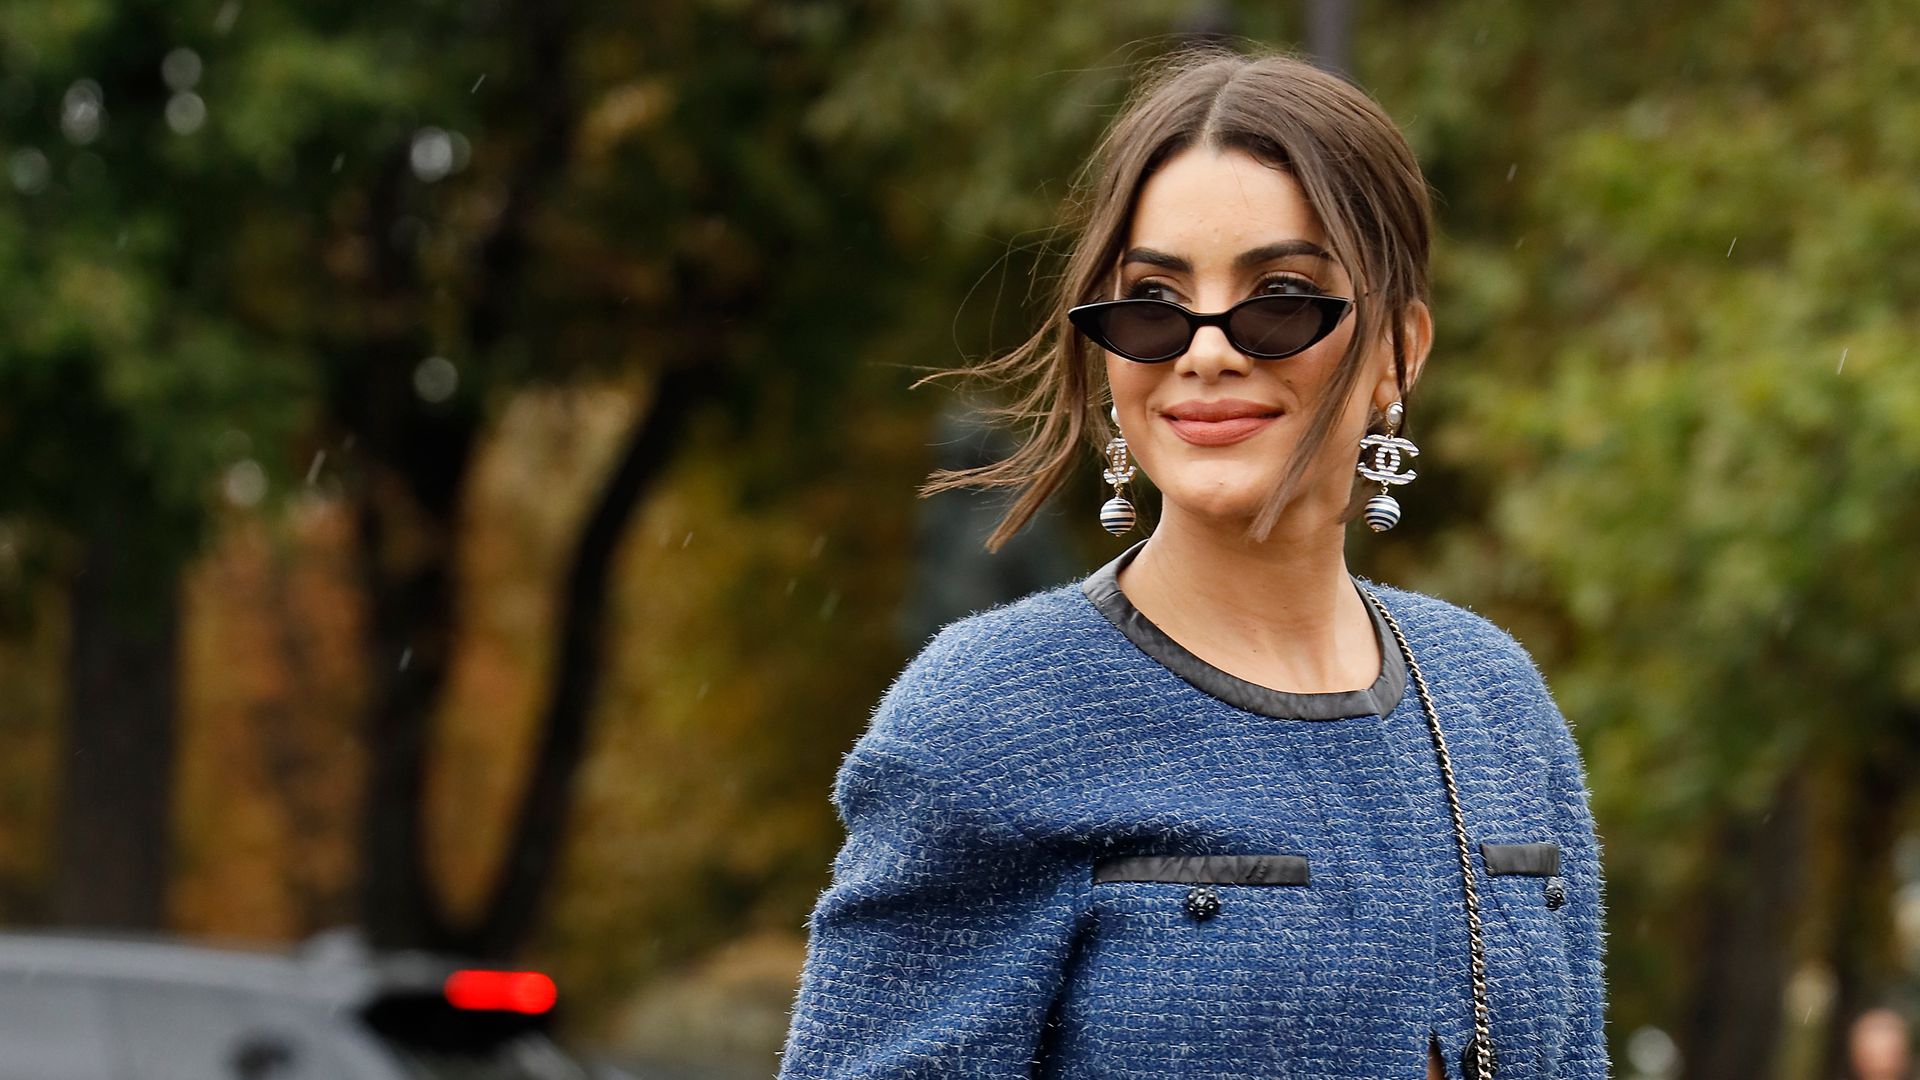 PARIS, FRANCE - OCTOBER 01: Camila Coelho wearing Chanel outside Chanel during Paris Fashion Week Womenswear Spring Summer 2020on October 01, 2019 in Paris, France. (Photo by Hanna Lassen/Getty Images)